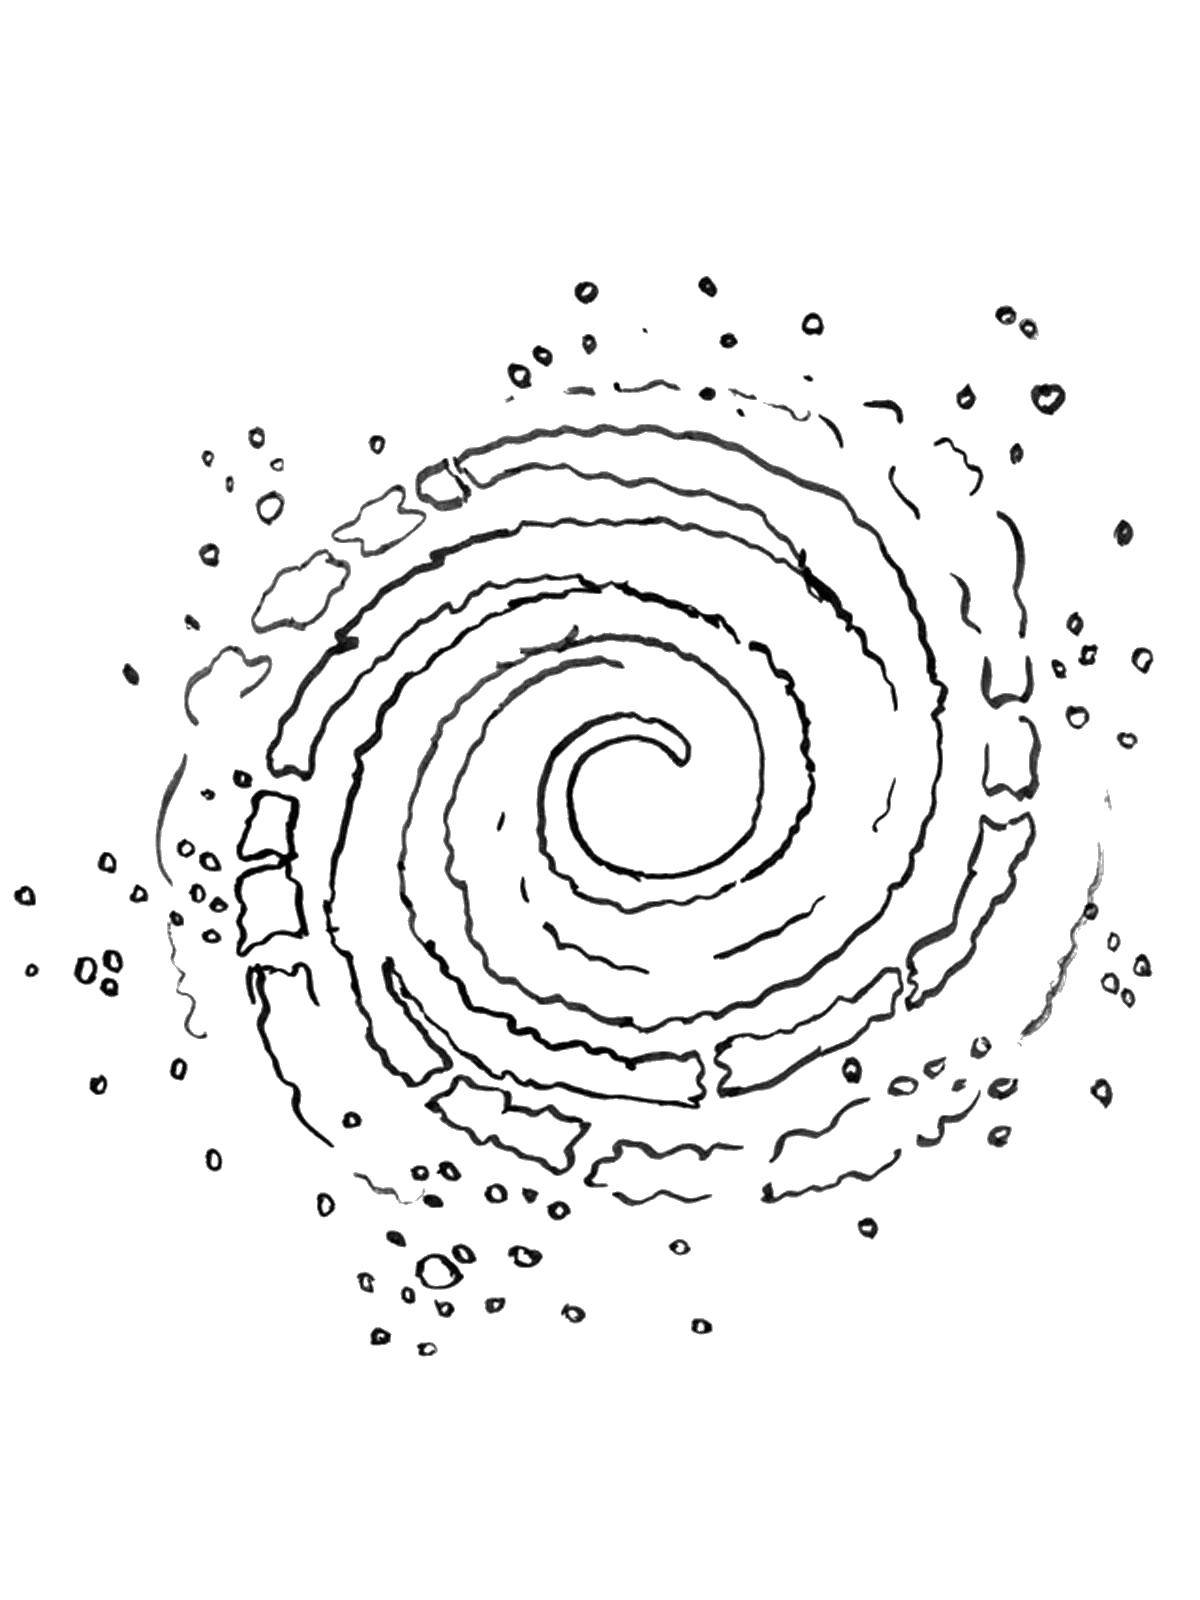 Coloring Galaxy and planets. Category space. Tags:  Space, planet, universe, Galaxy.